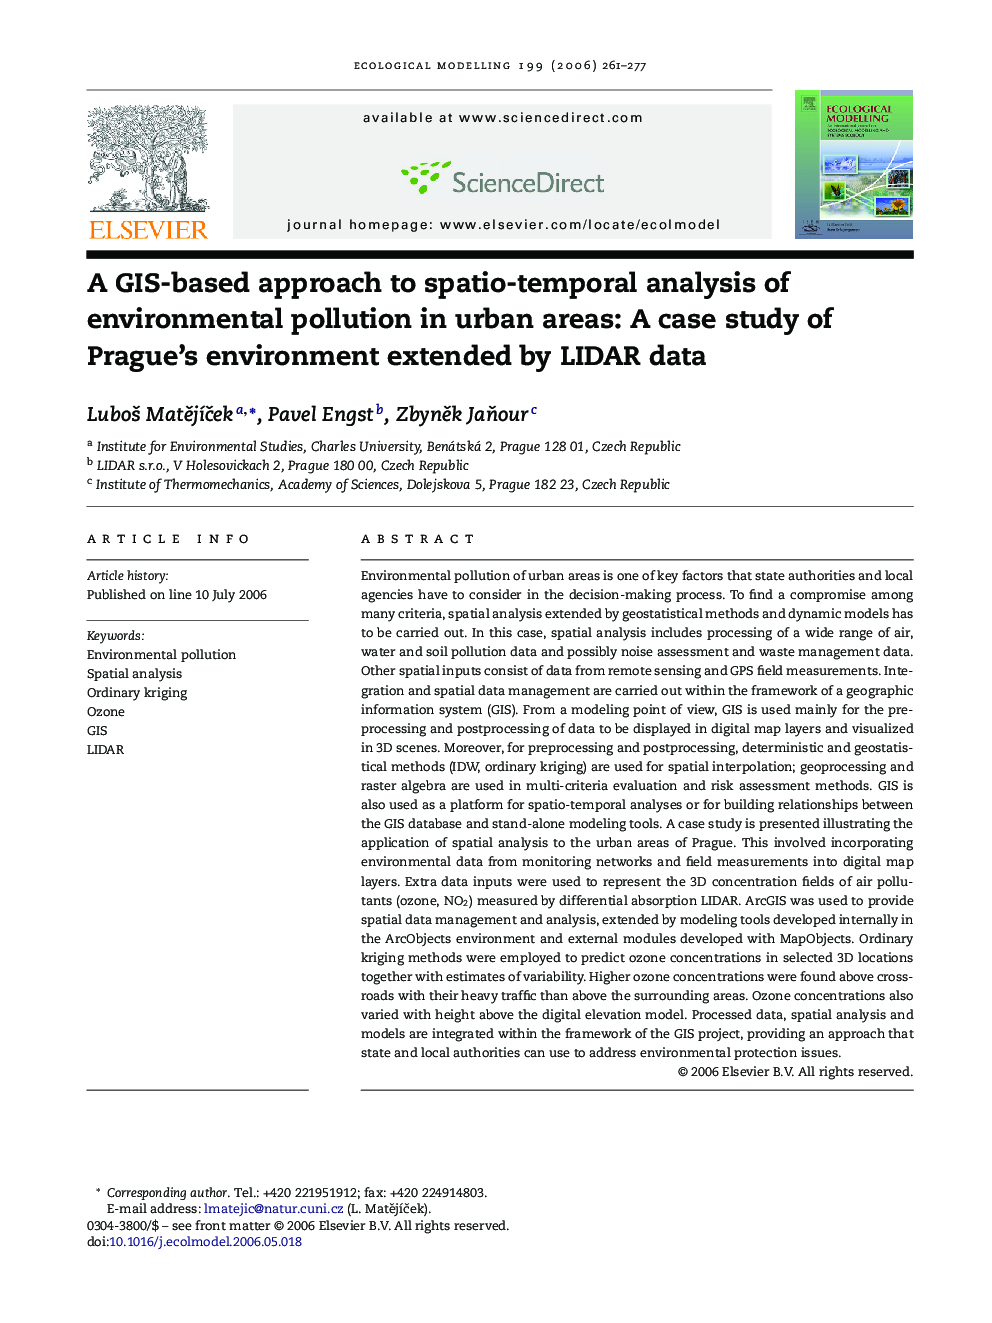 A GIS-based approach to spatio-temporal analysis of environmental pollution in urban areas: A case study of Prague's environment extended by LIDAR data